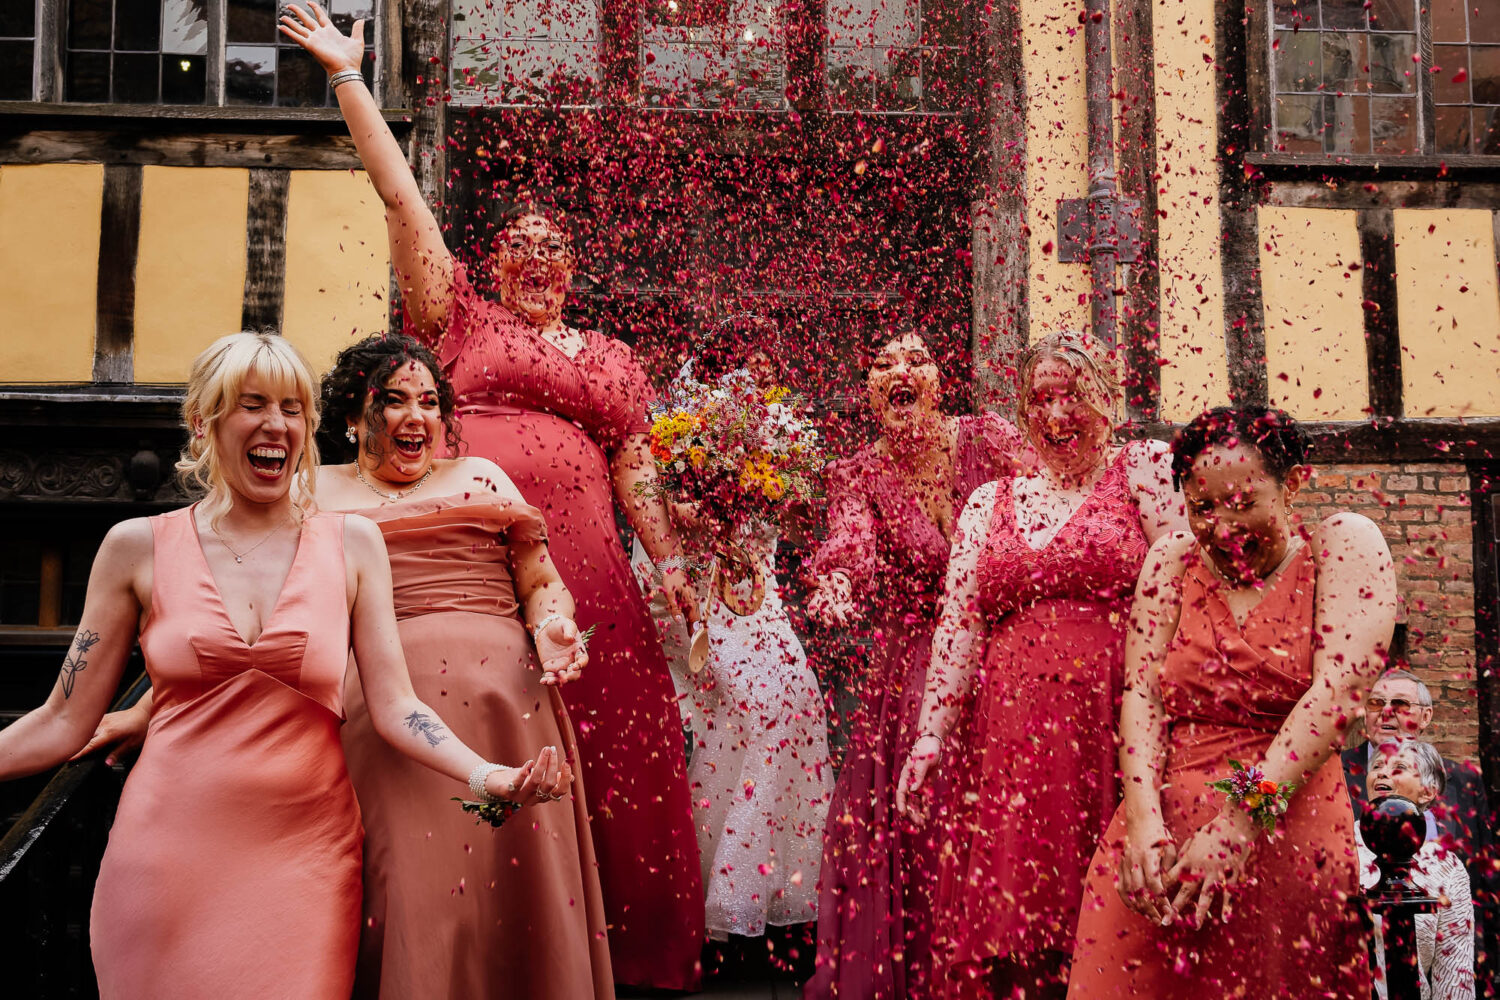 Bridesmaid group photo with pink dresses and pink confetti